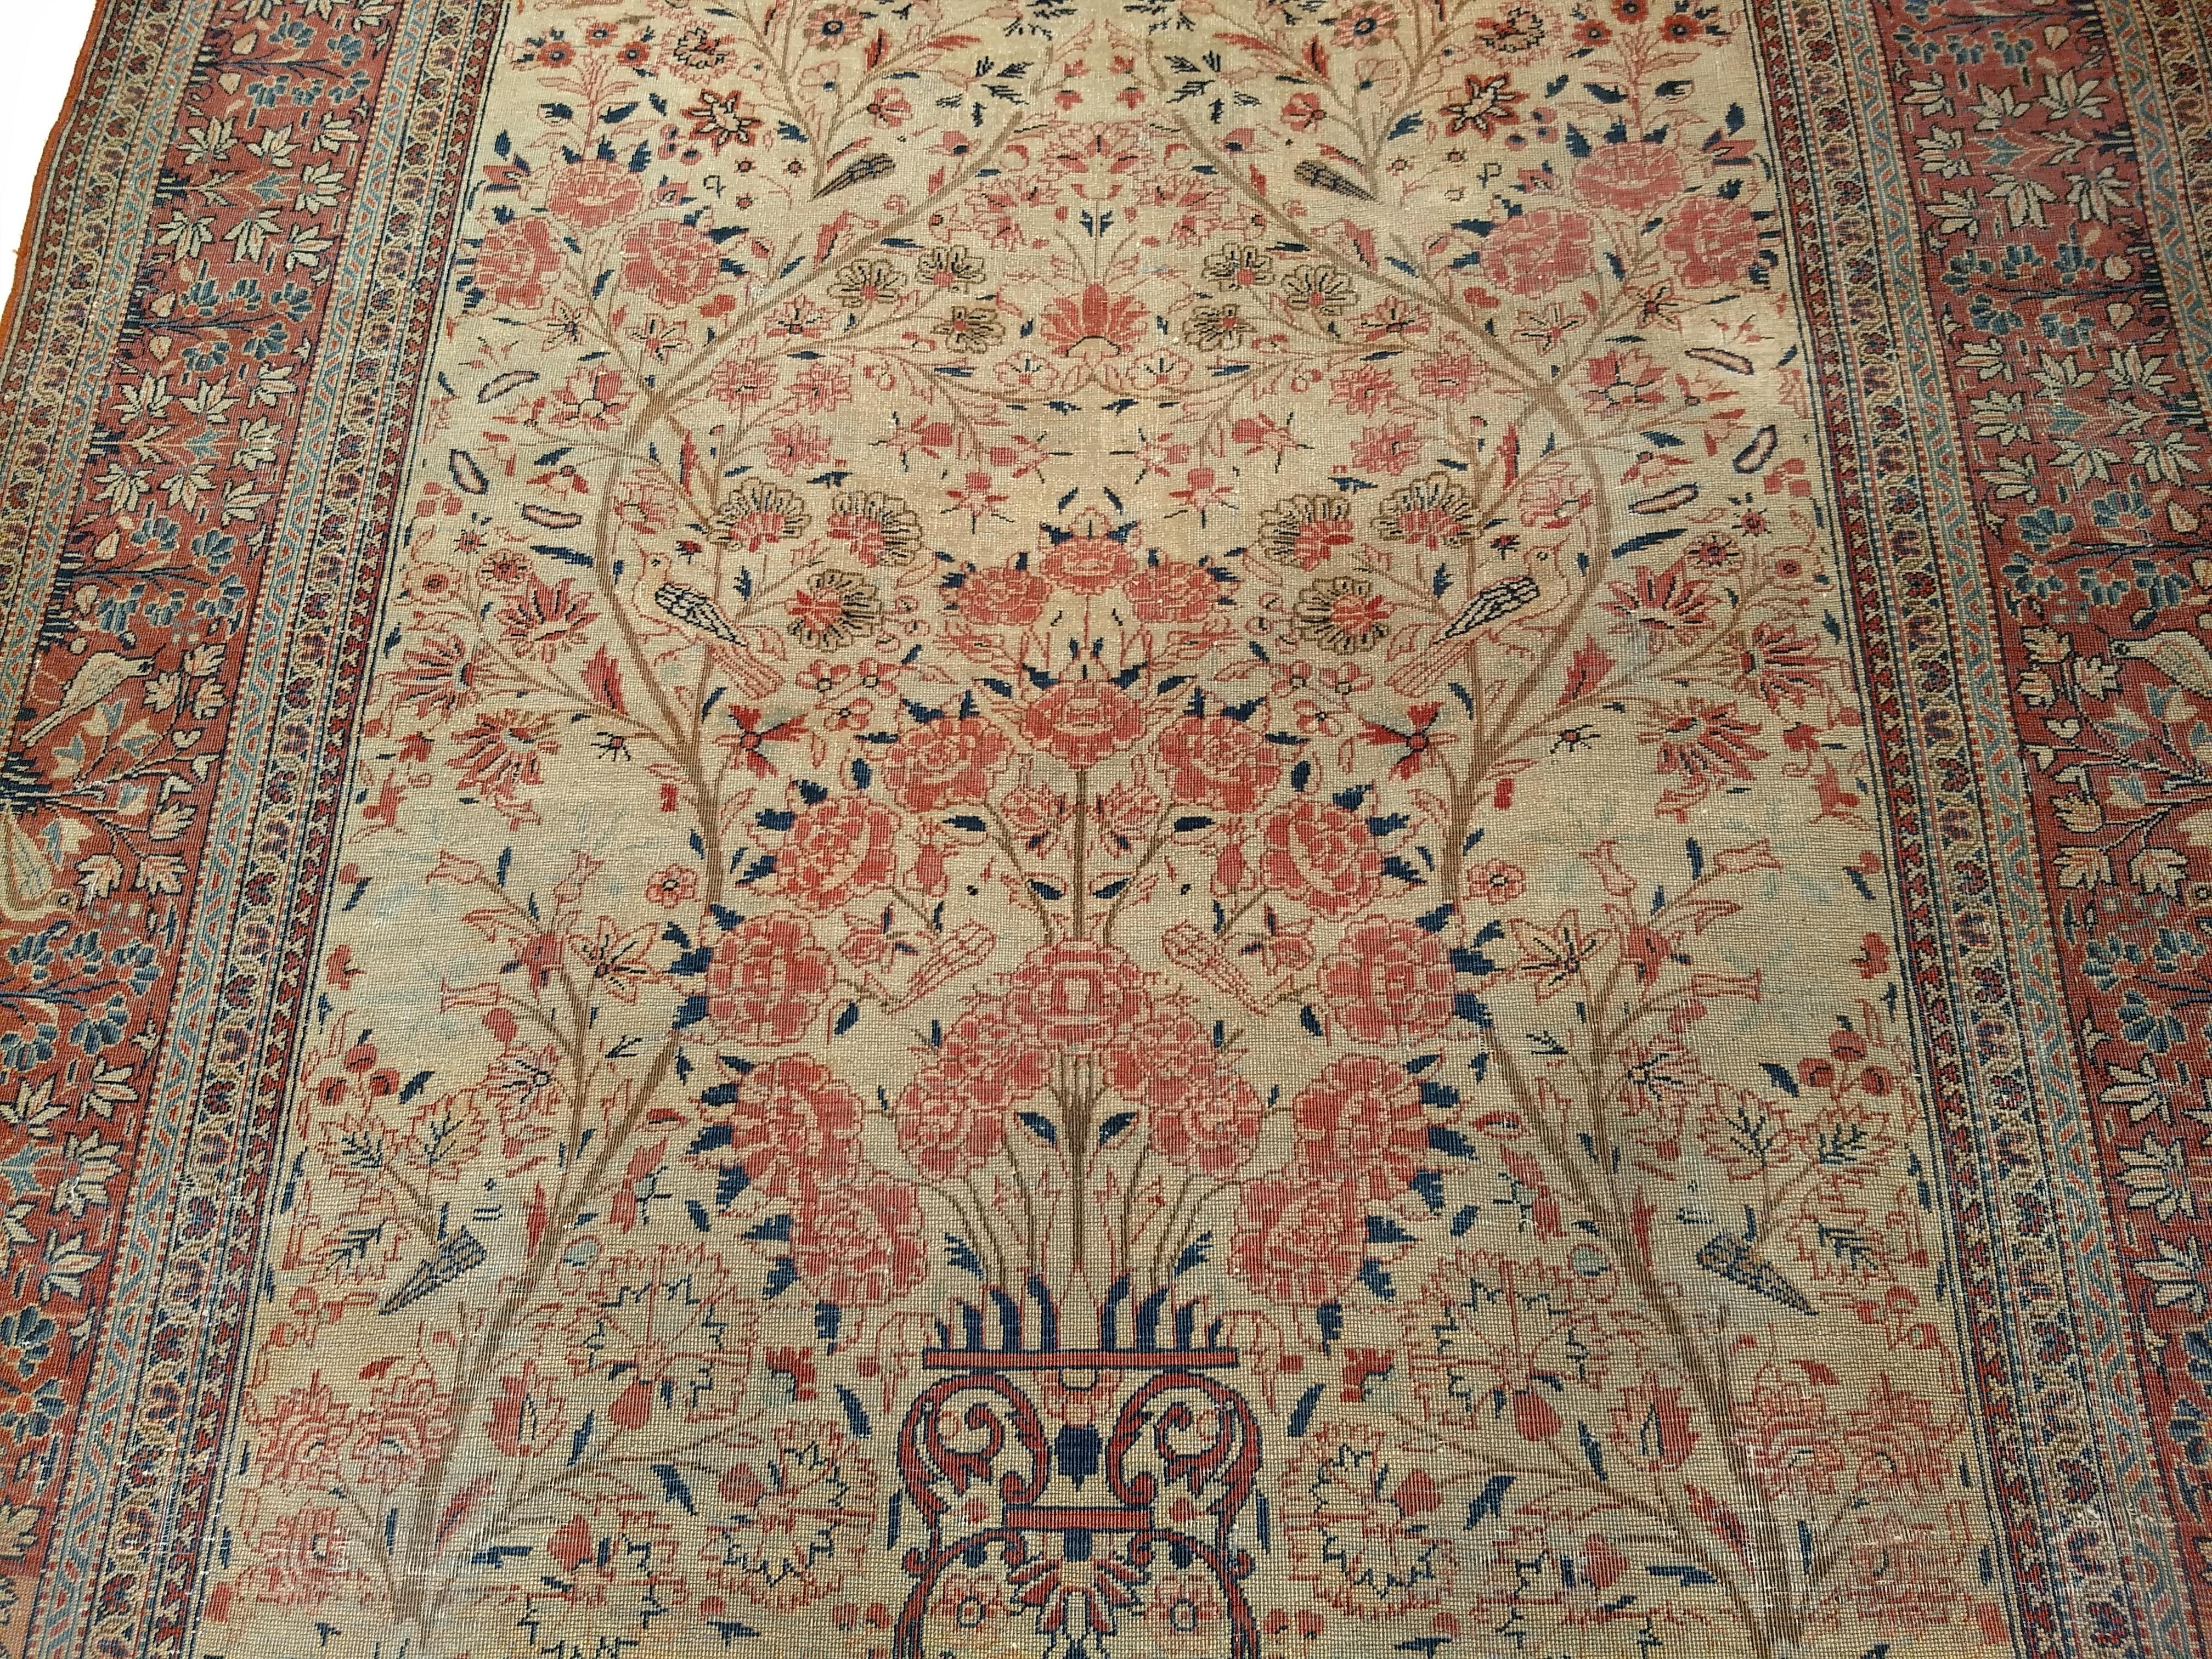 19th Century Persian Kashan Vase “Tree of Life” Rug in Ivory, Brick Red, Navy For Sale 3